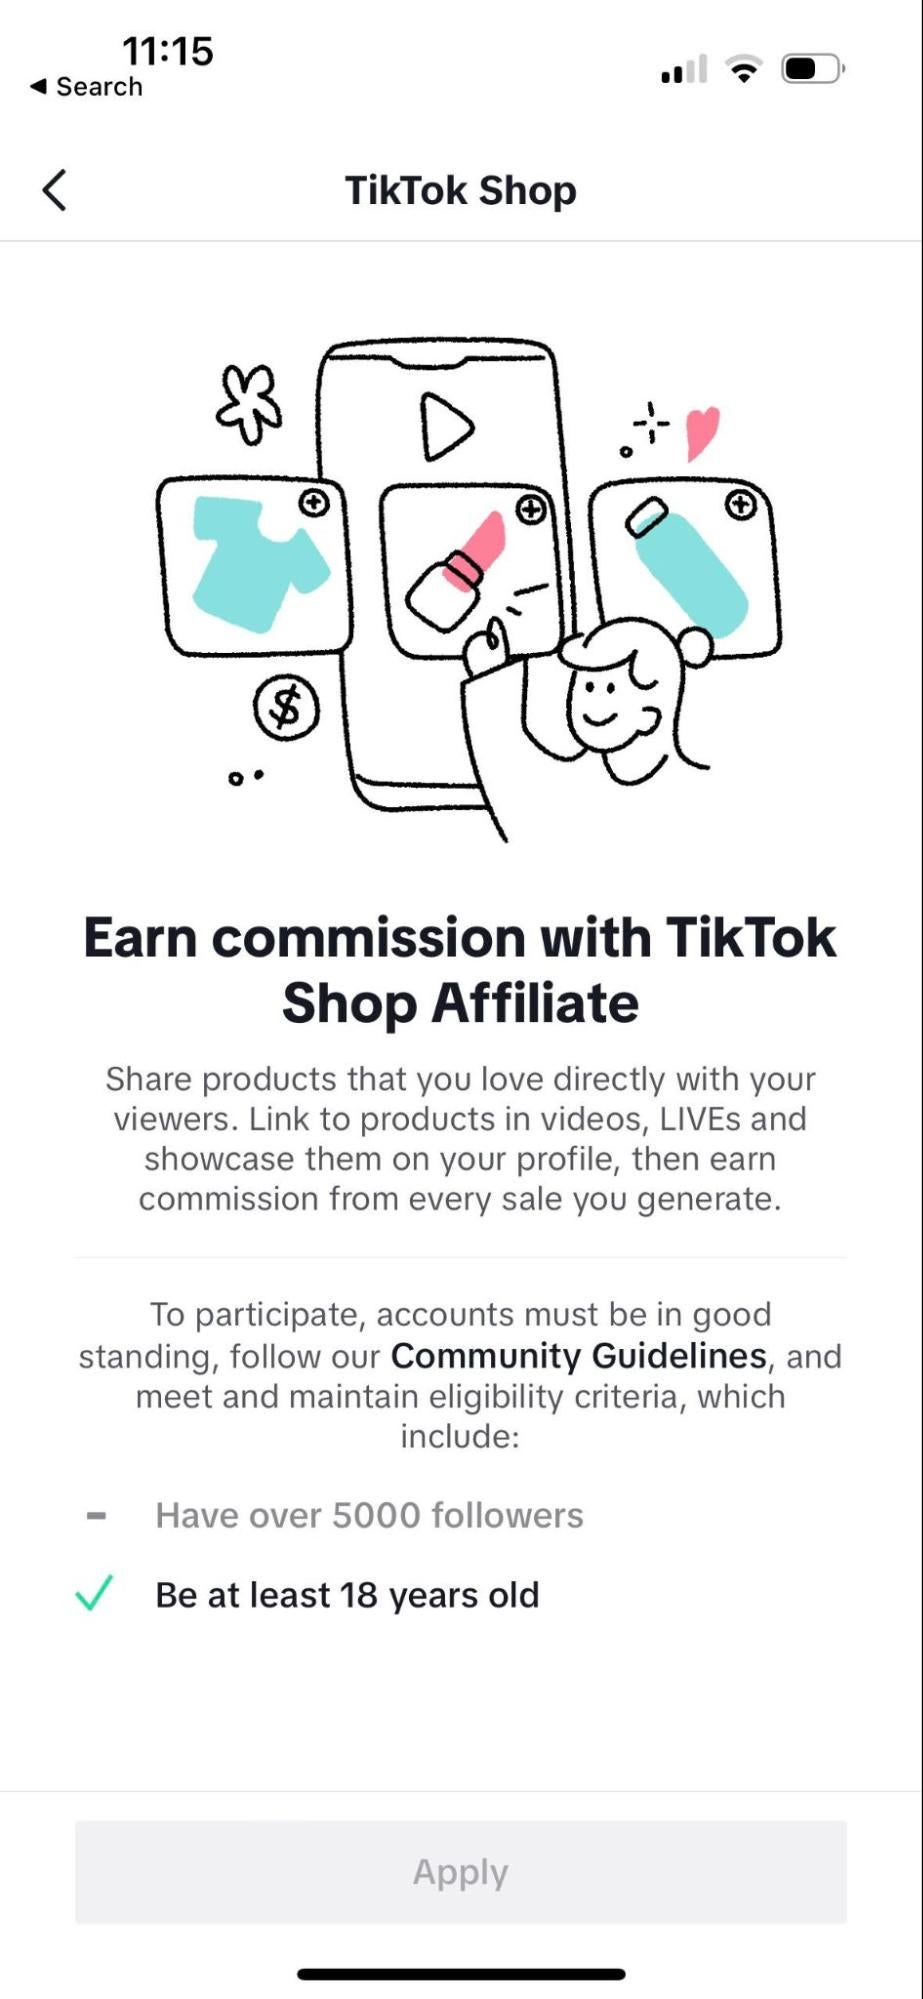 What's happening with TikTok Shop? The opportunity, the advantage